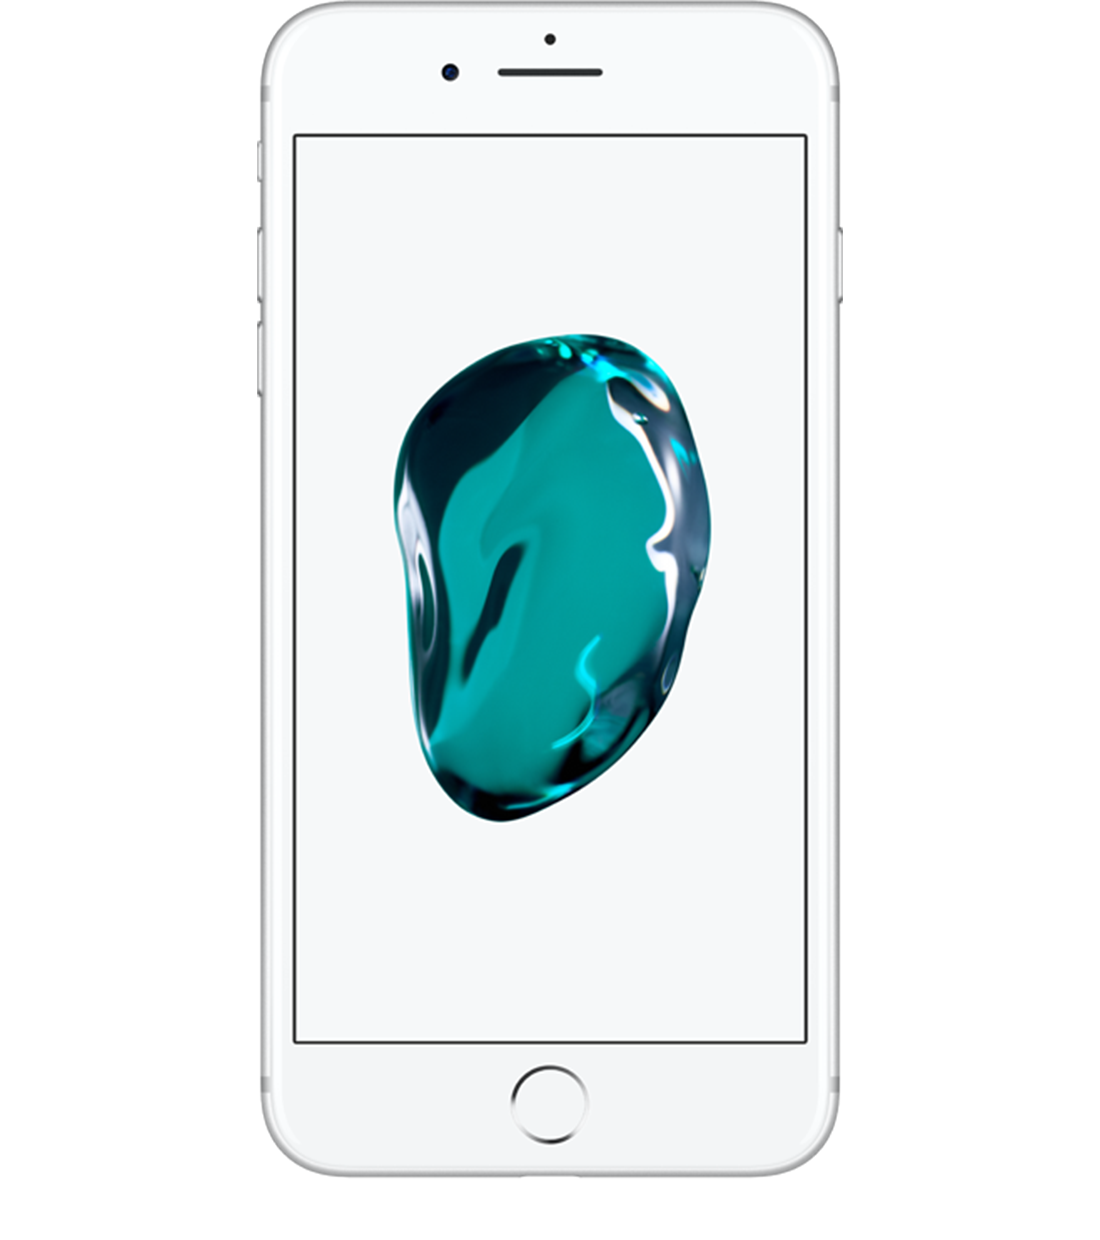 Apple-iPhone_iPhone7Plus@2x.png